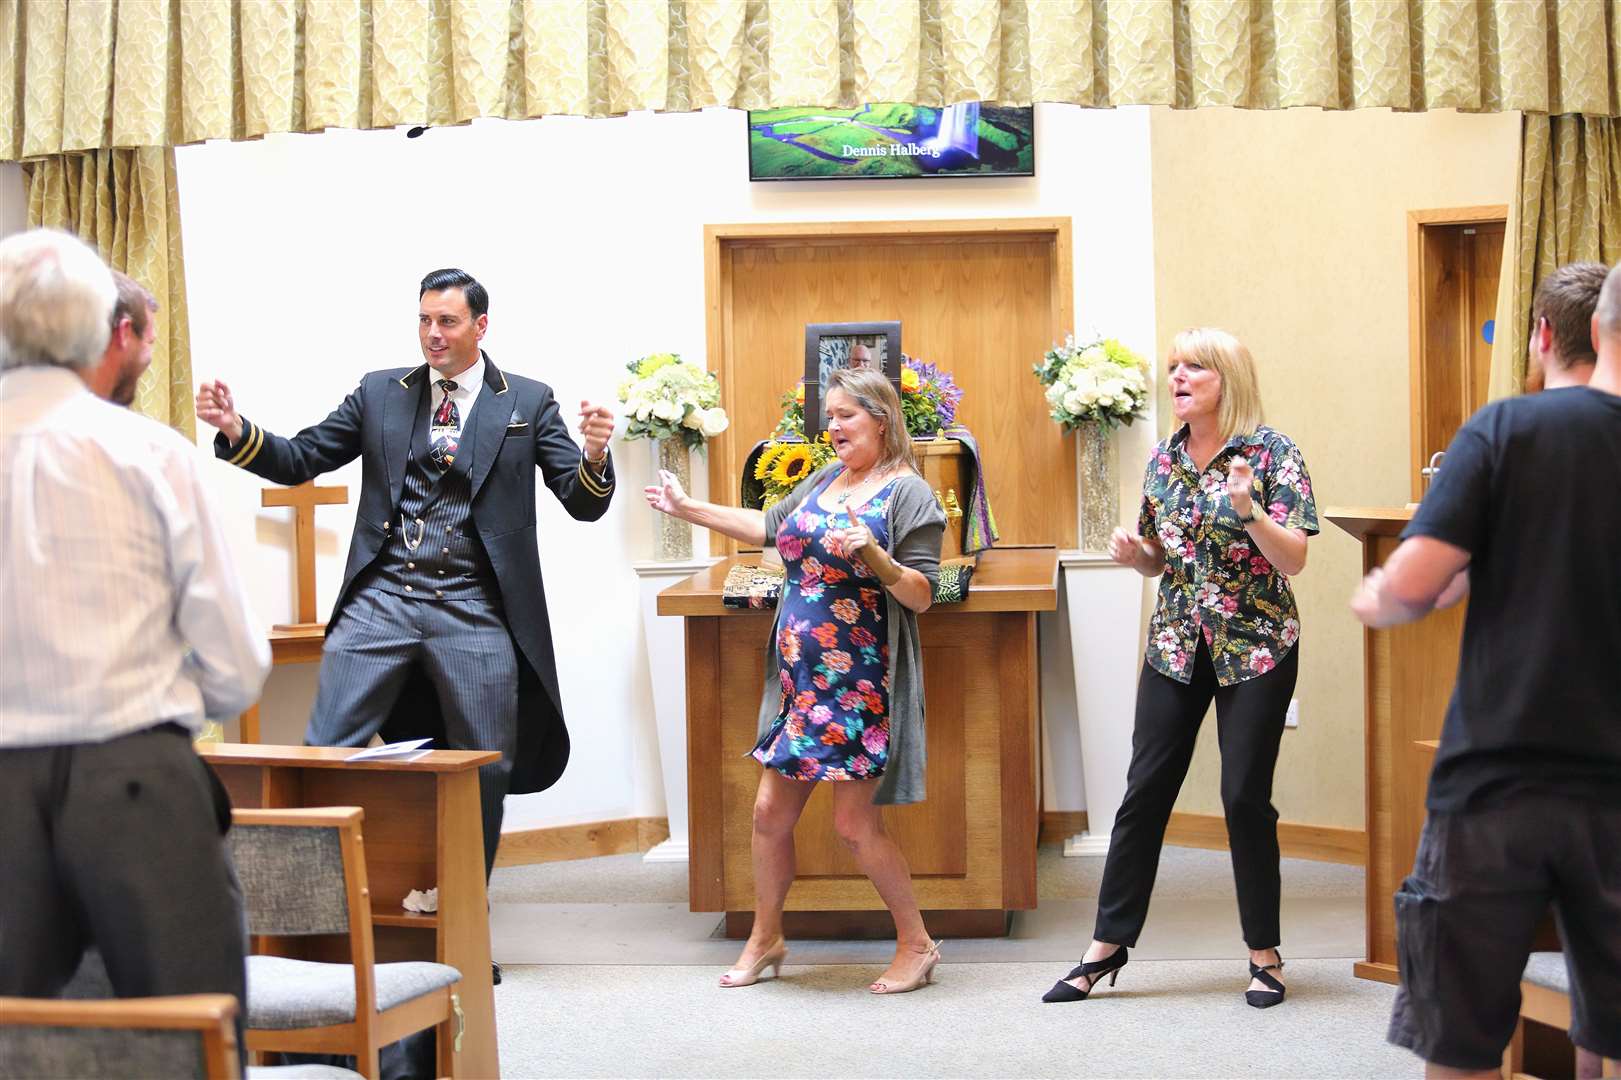 Family and friends performing the Time Warp at the funeral of Dennis Halberg. Photo: W Uden and Sons